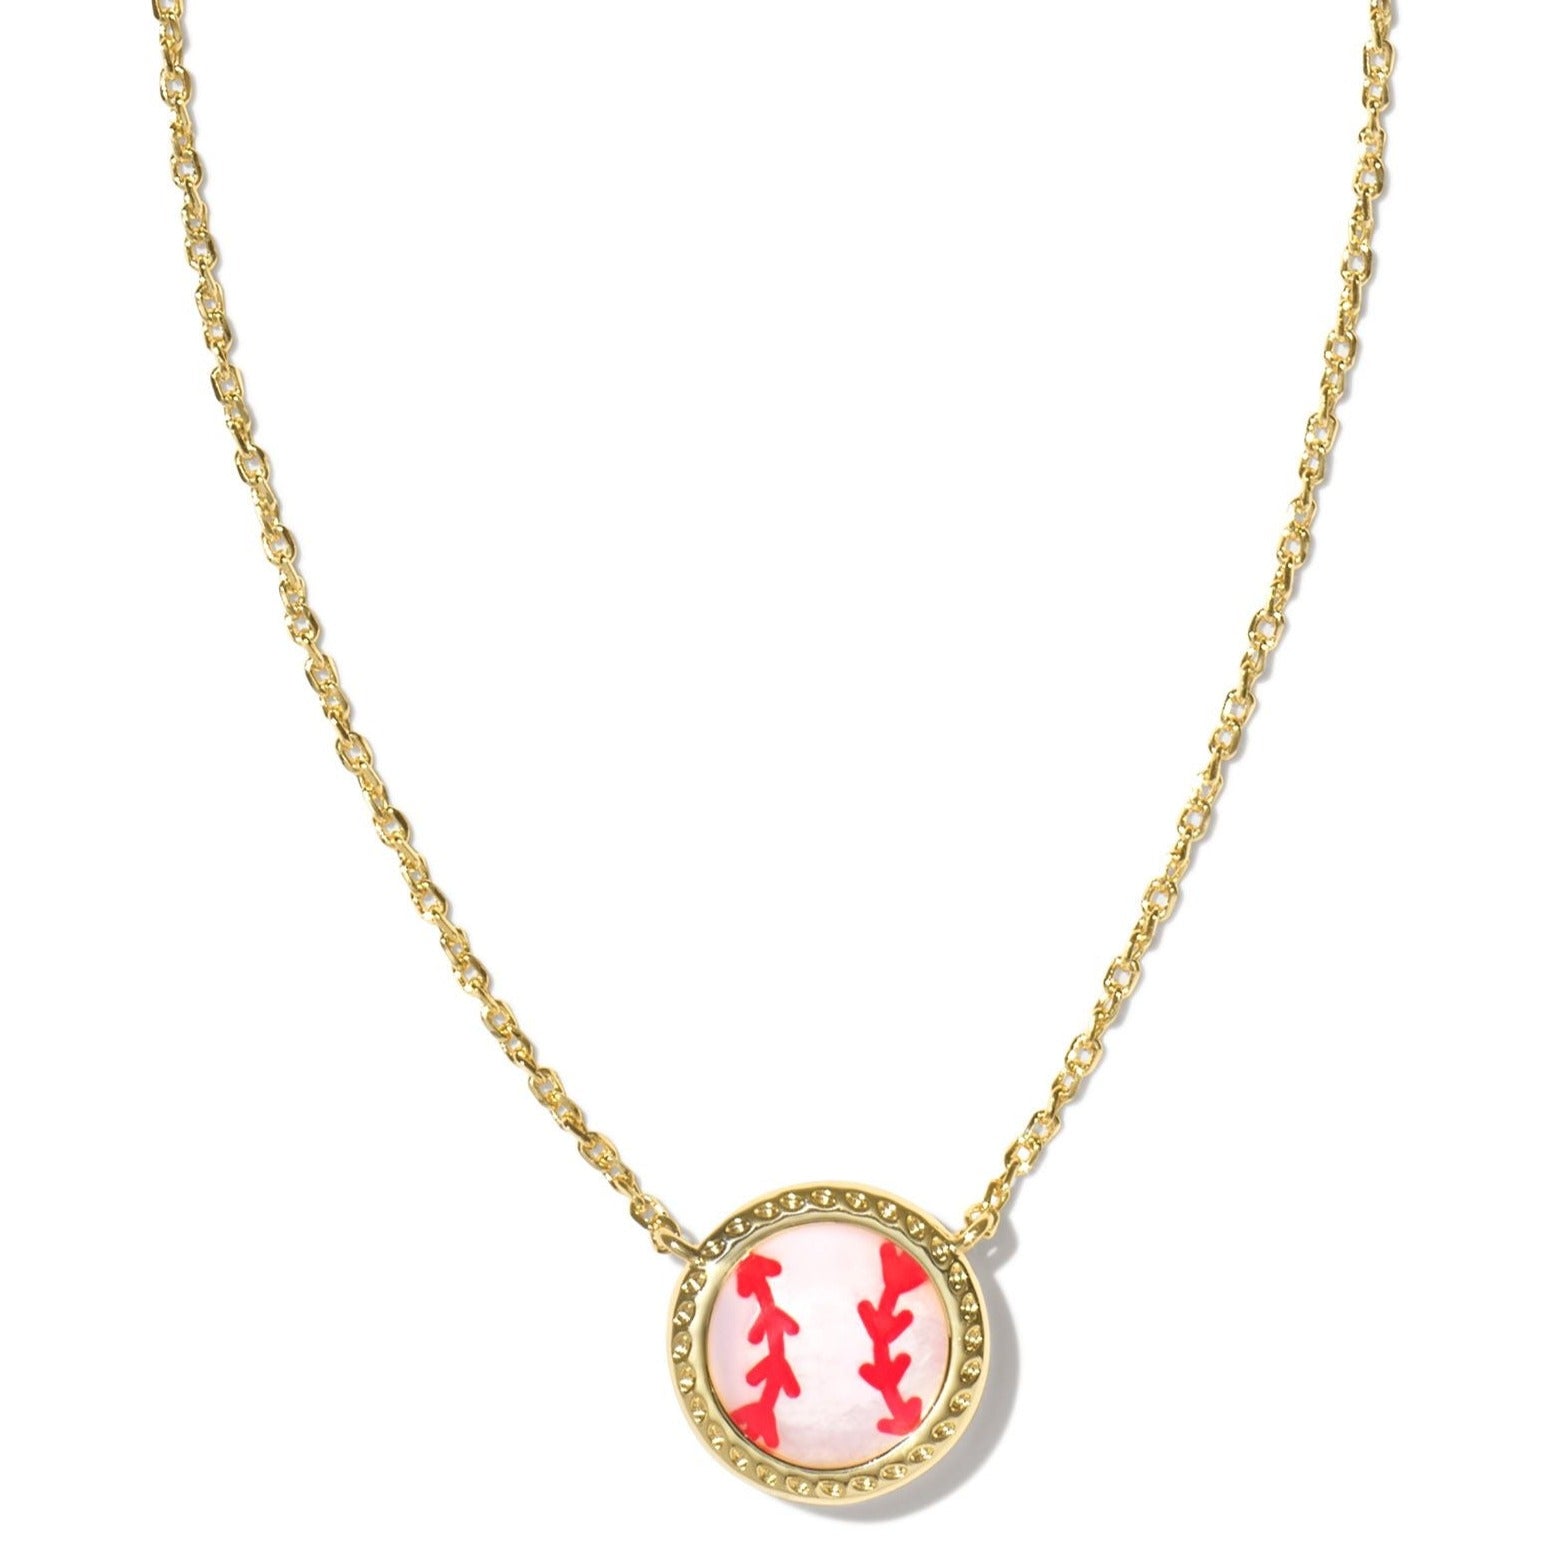 Kendra Scott | Baseball Gold Short Pendant Necklace in Ivory Mother-of-Pearl - Giddy Up Glamour Boutique